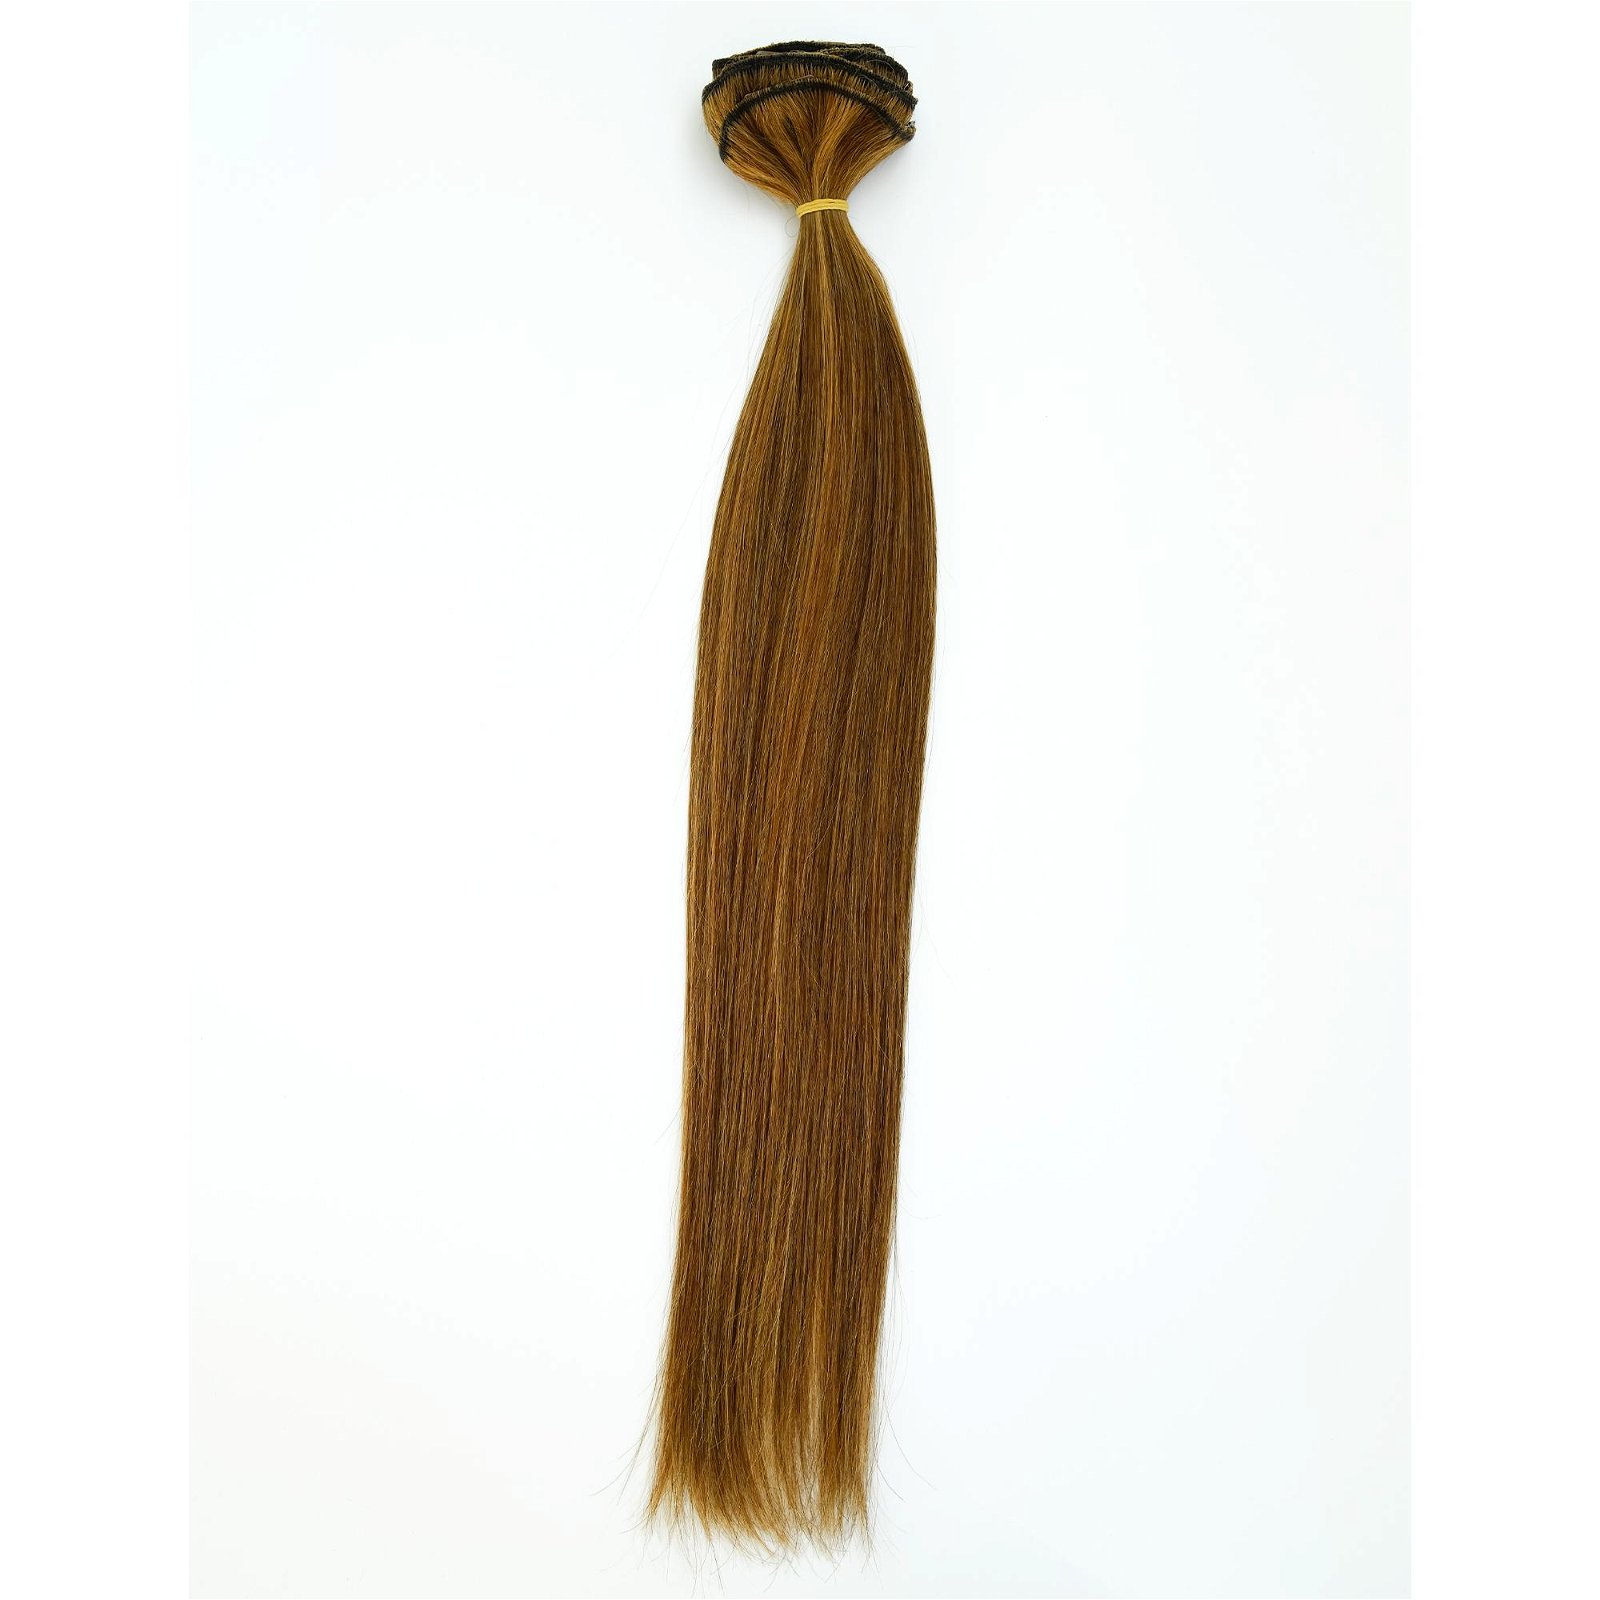 Welf with Clip Hair Extensions 5